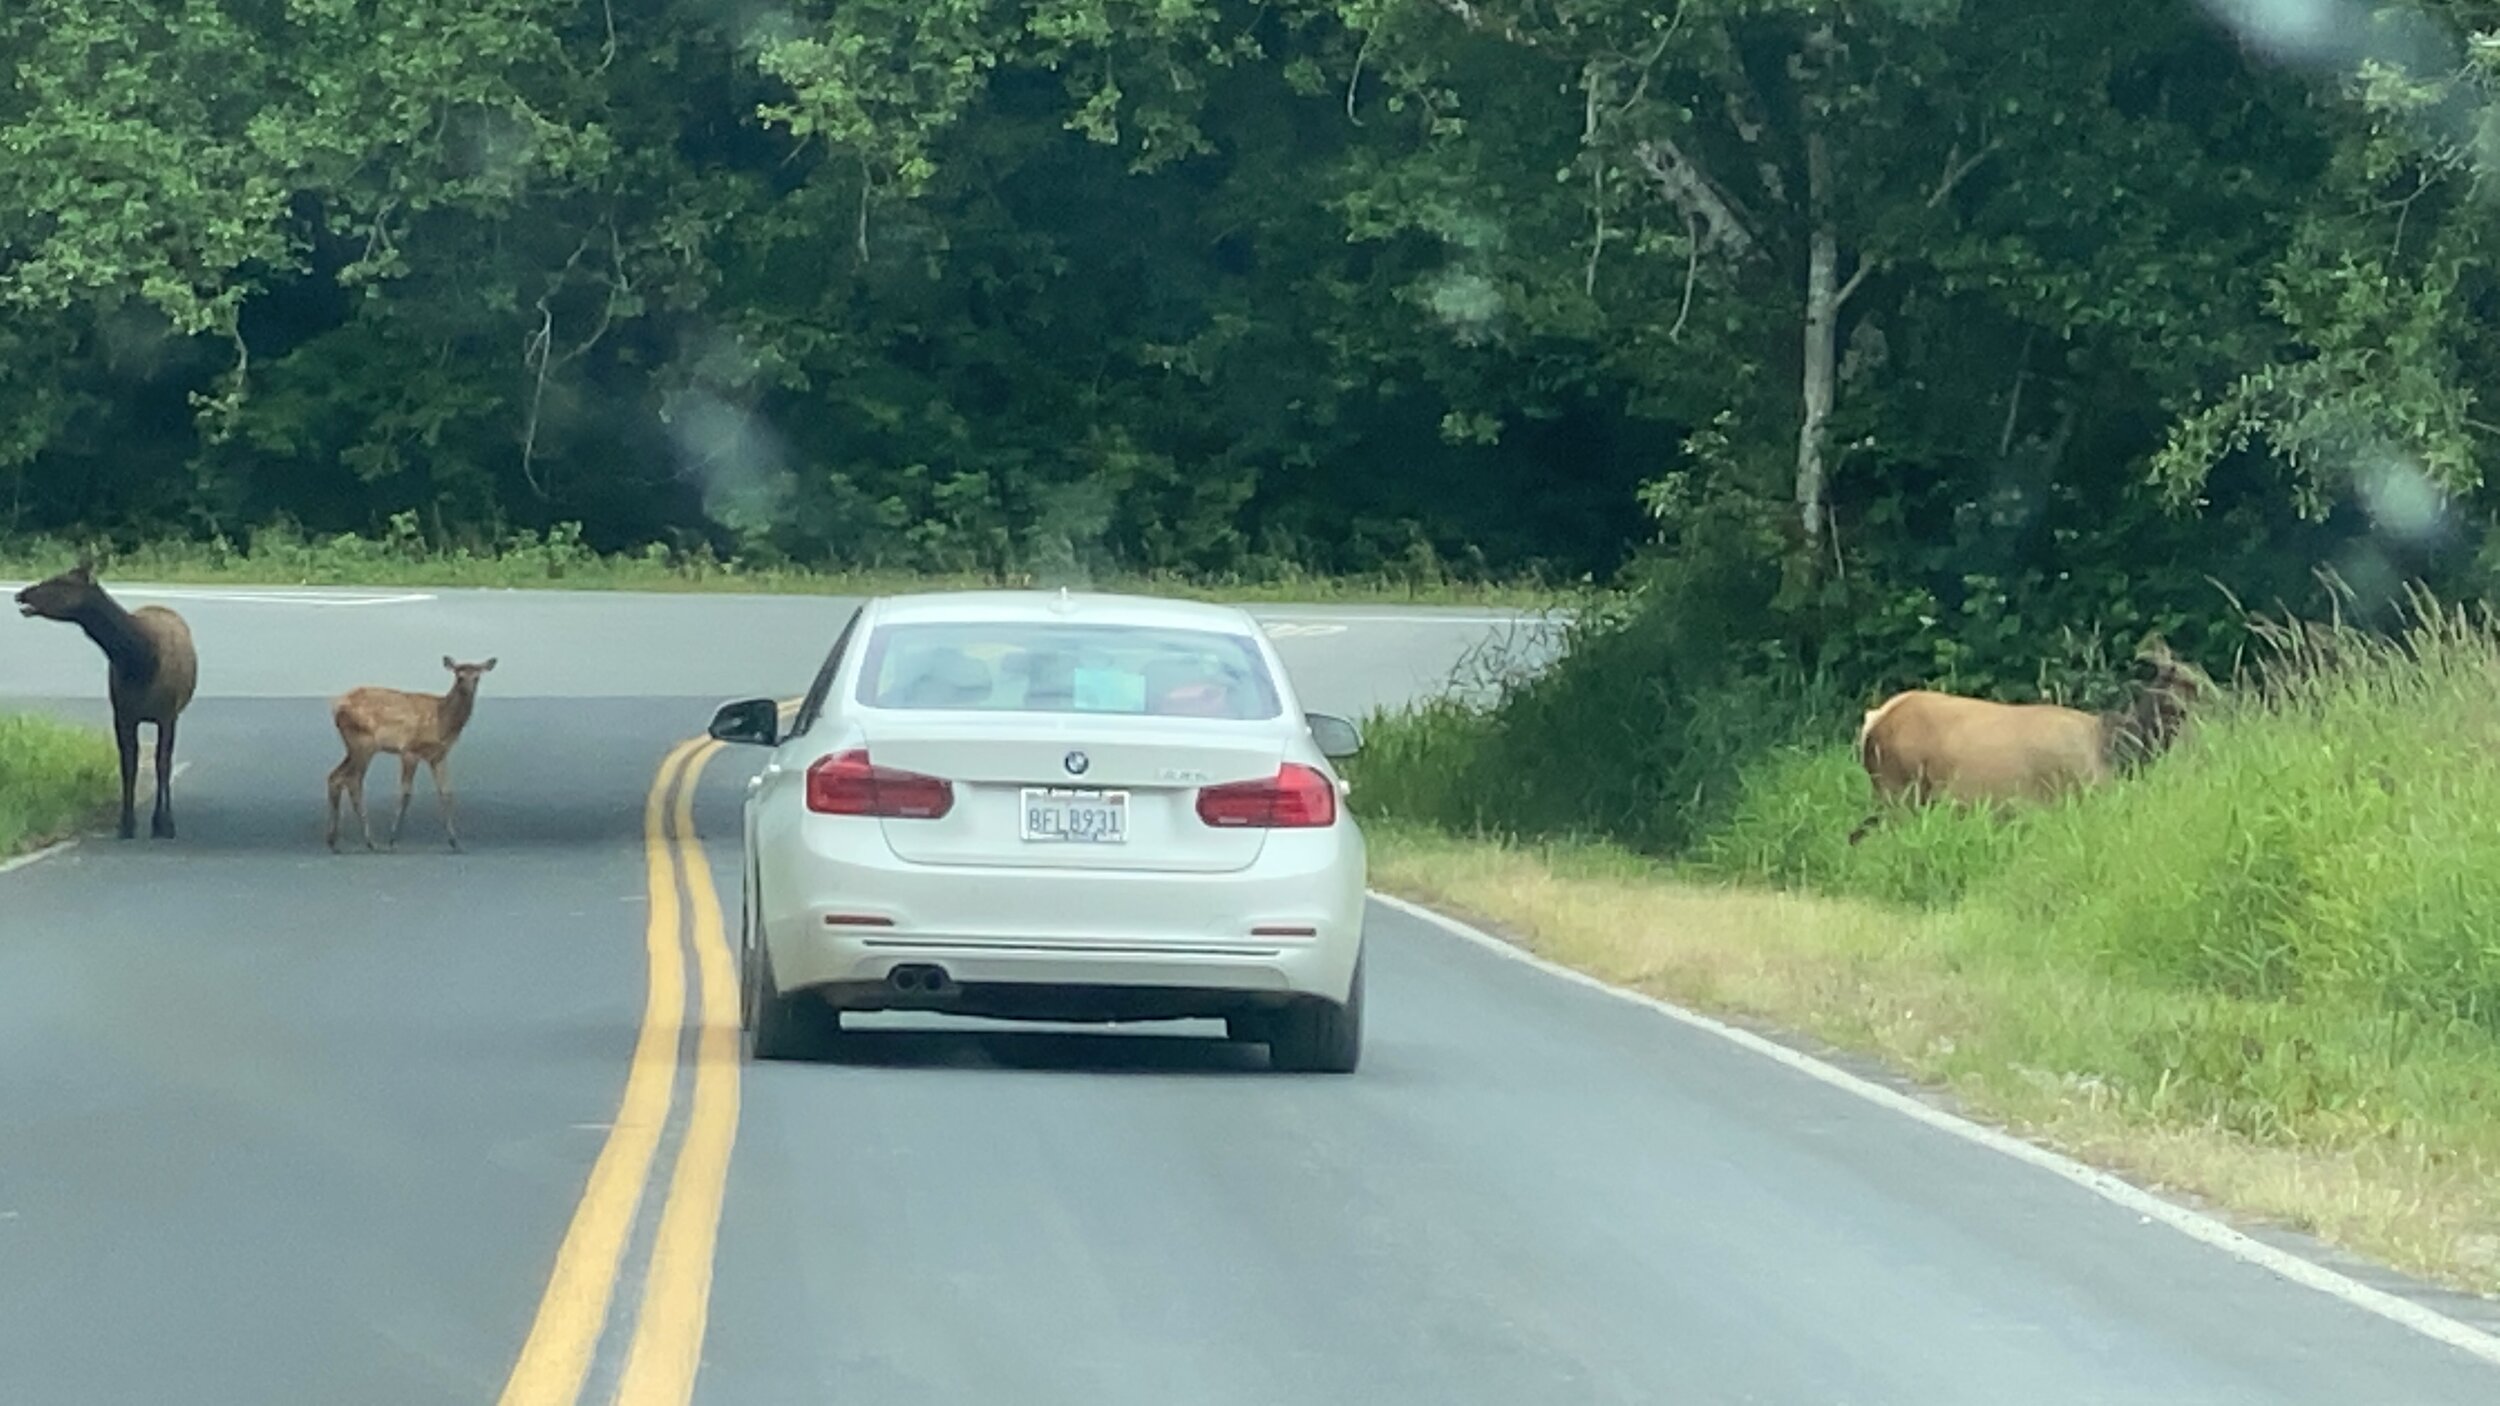 This elk acted like a crossing guard calling to the other elk to keep it moving while she had traffic stopped.  Photo by Karen Boudreaux, June 12, 2021